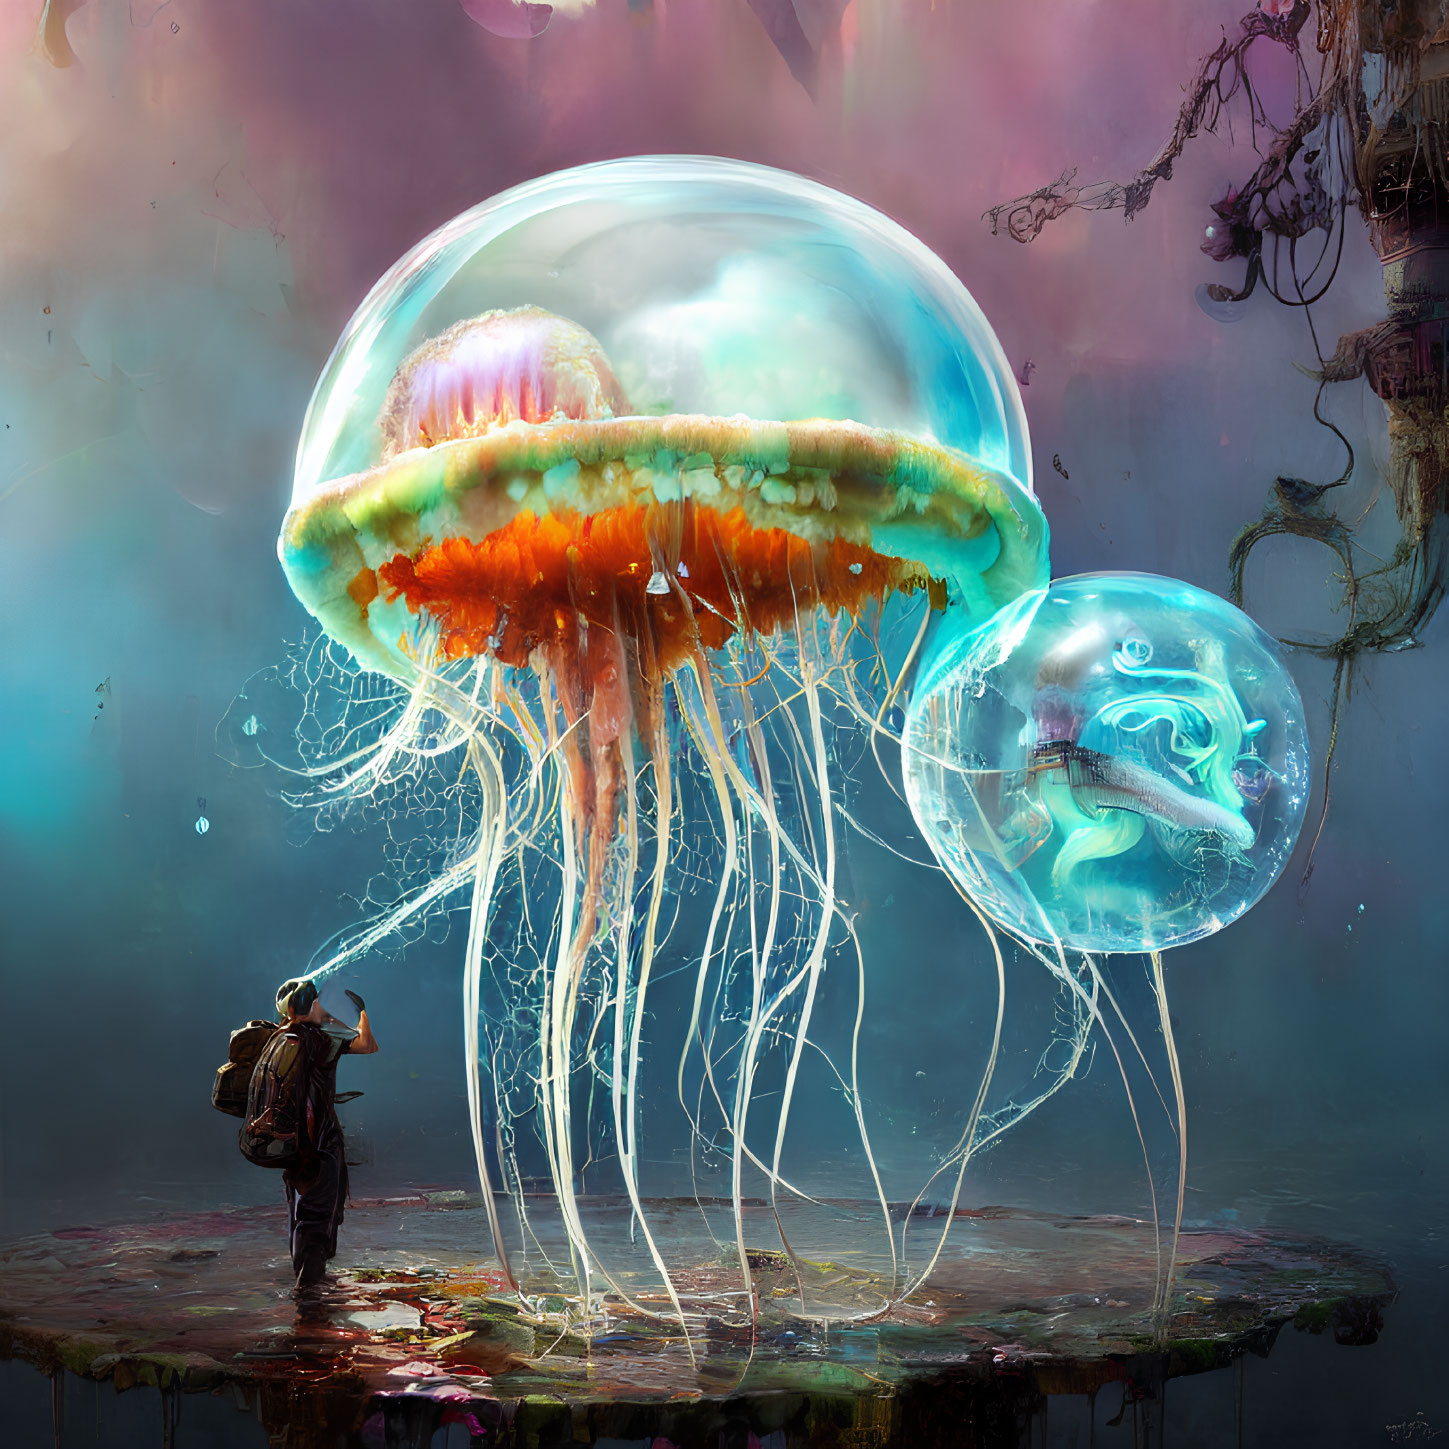 Person gazes at giant jellyfish in ethereal, pastel-hued fantasy scene